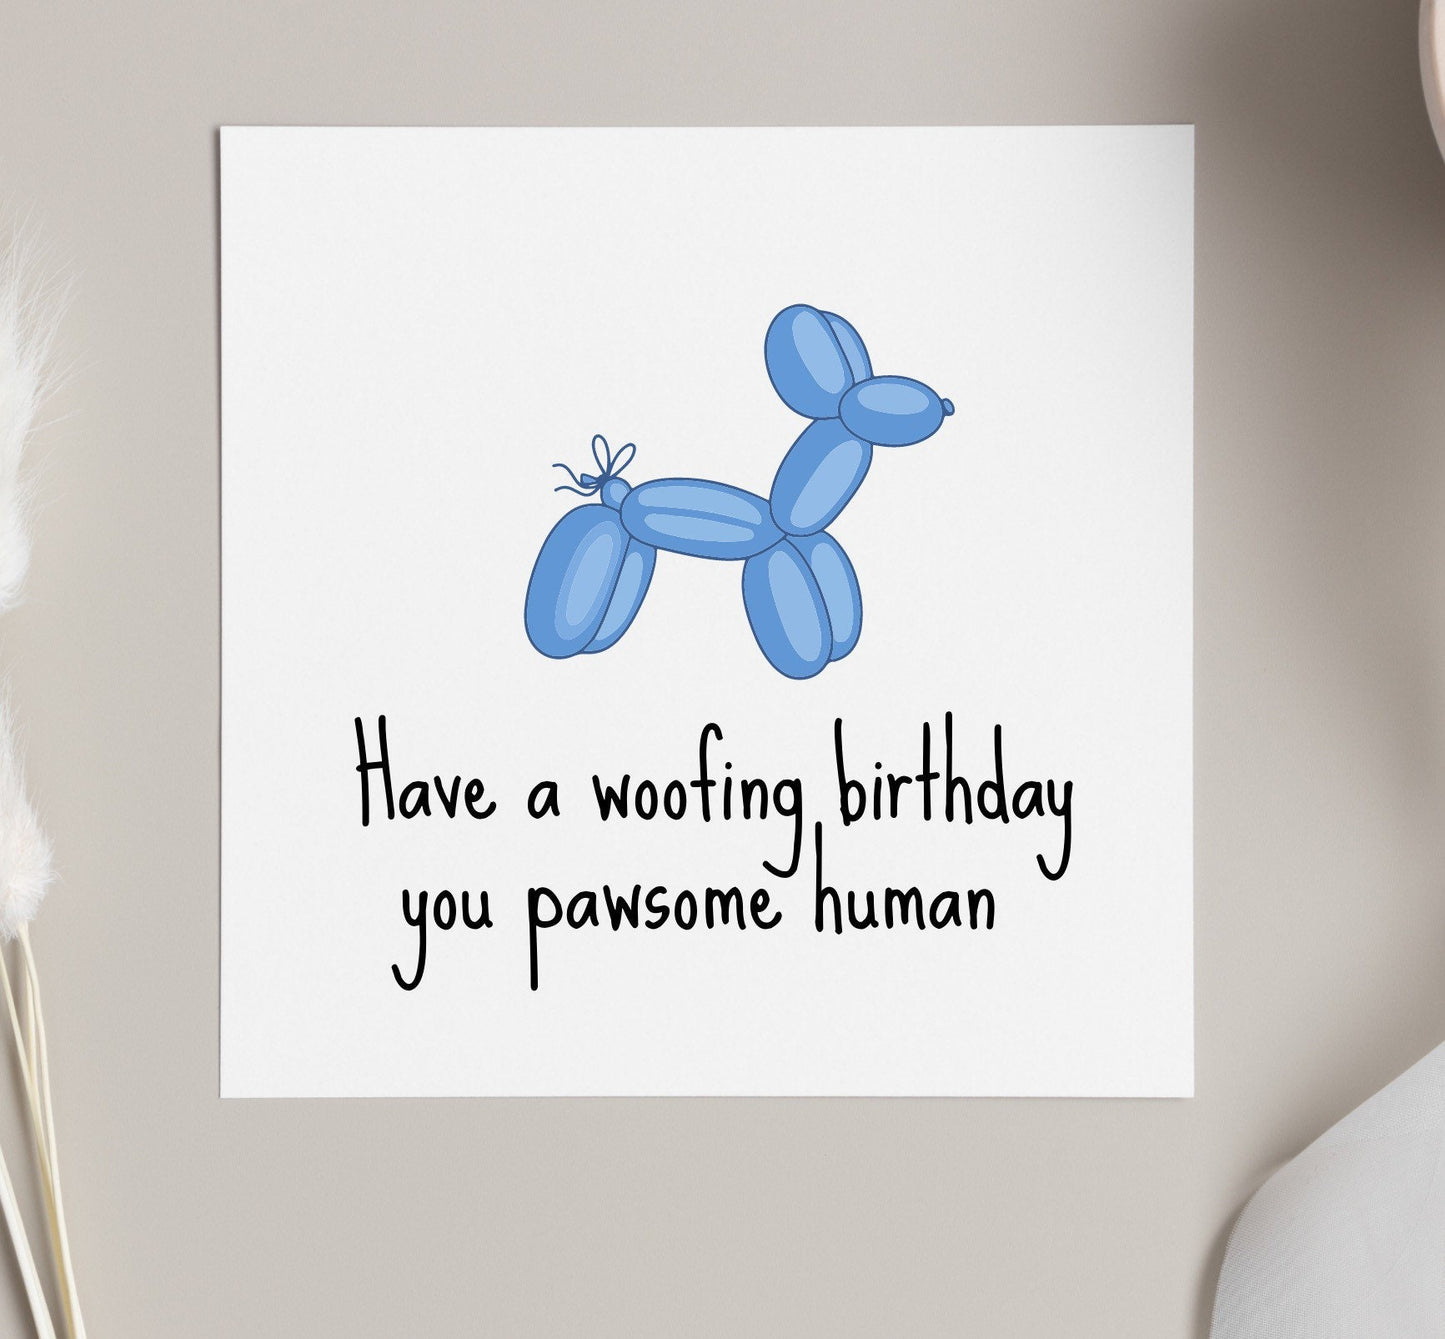 Have a woofing birthday you pawsome human, birthday cards from the dog, furry friend cards, card from fur baby, dog mum bday cards